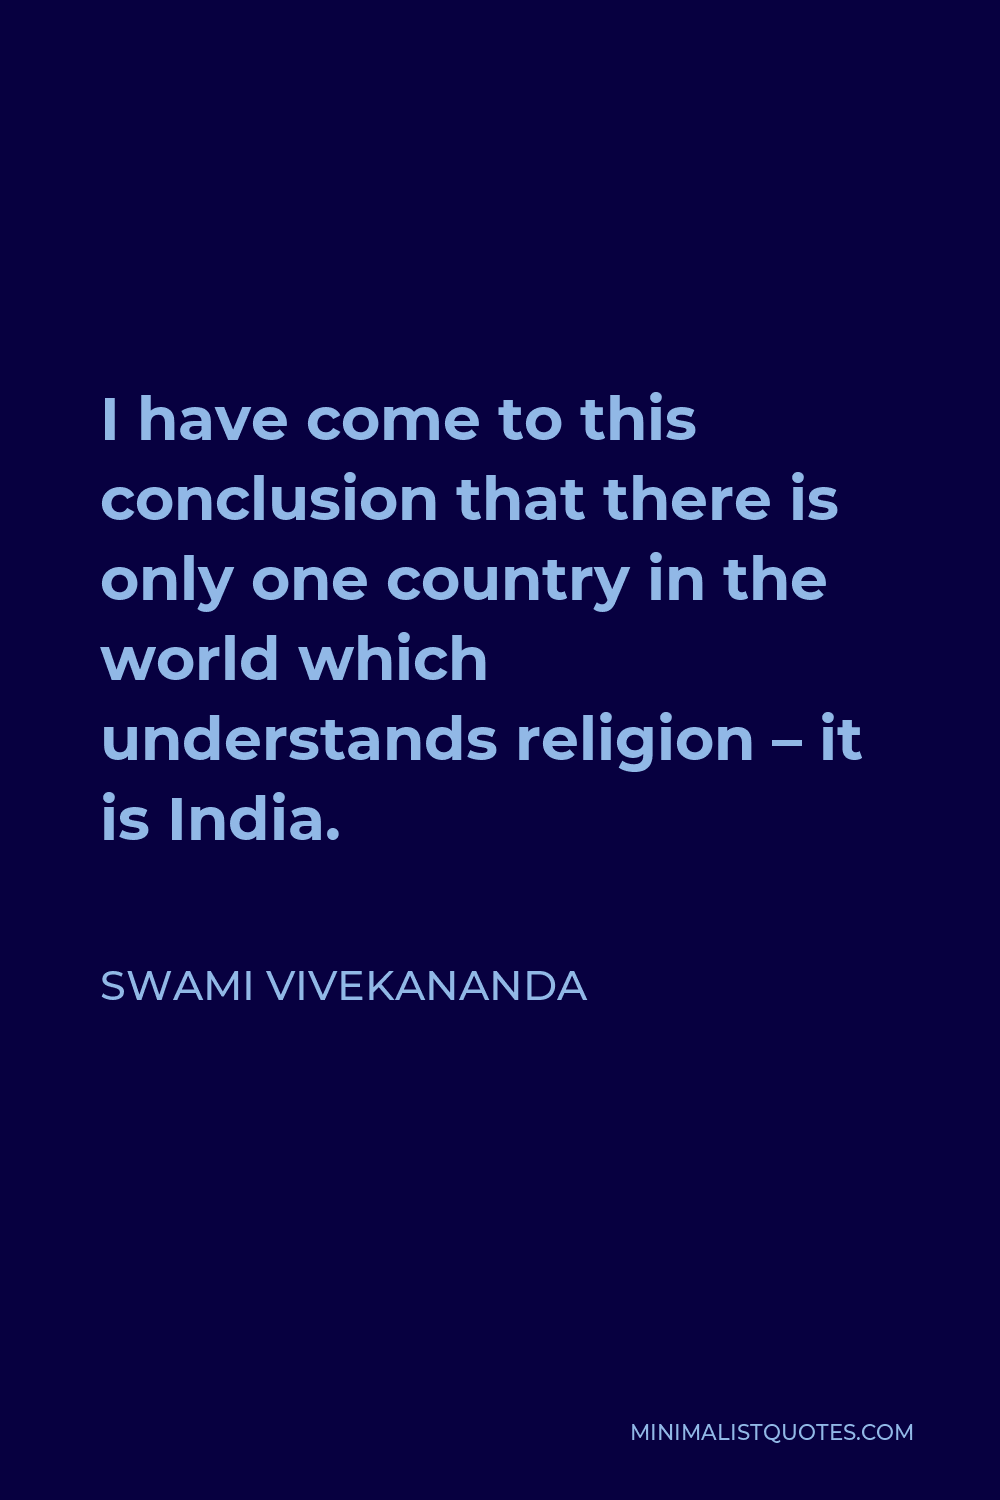 Swami Vivekananda Quote - I have come to this conclusion that there is only one country in the world which understands religion – it is India.